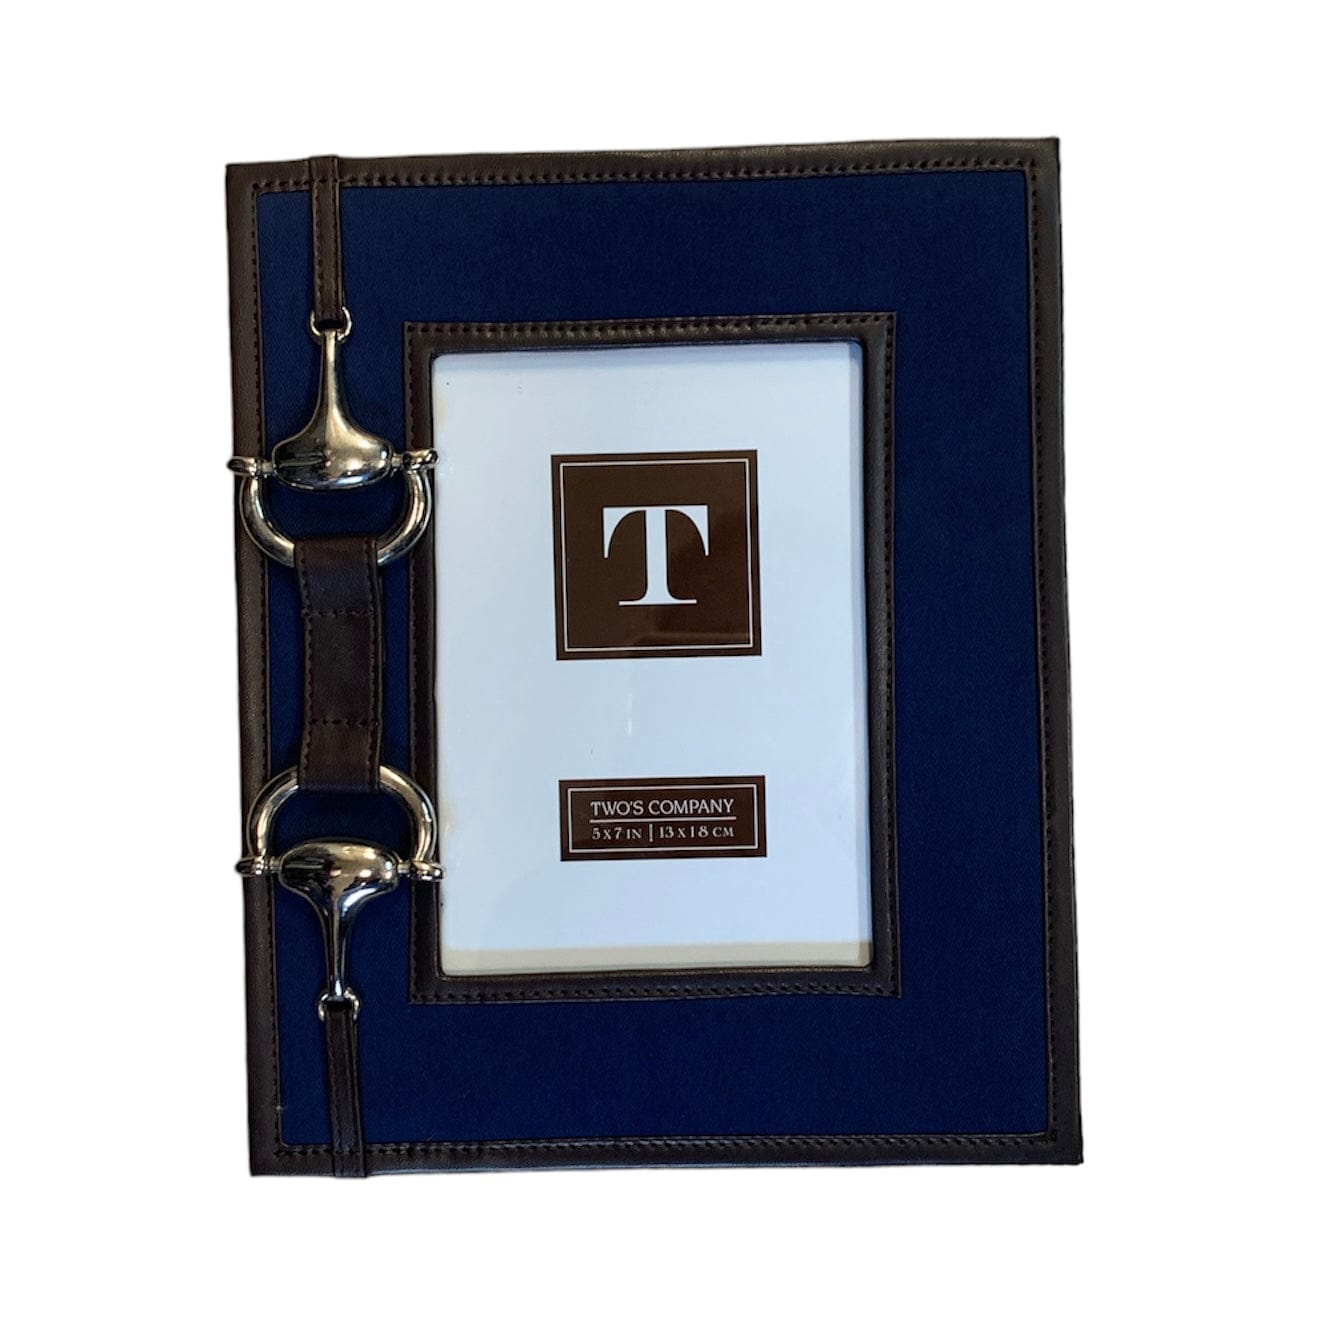 Blue Picture frame with brown leather border and snaffle bit decoration on left side of frame. 